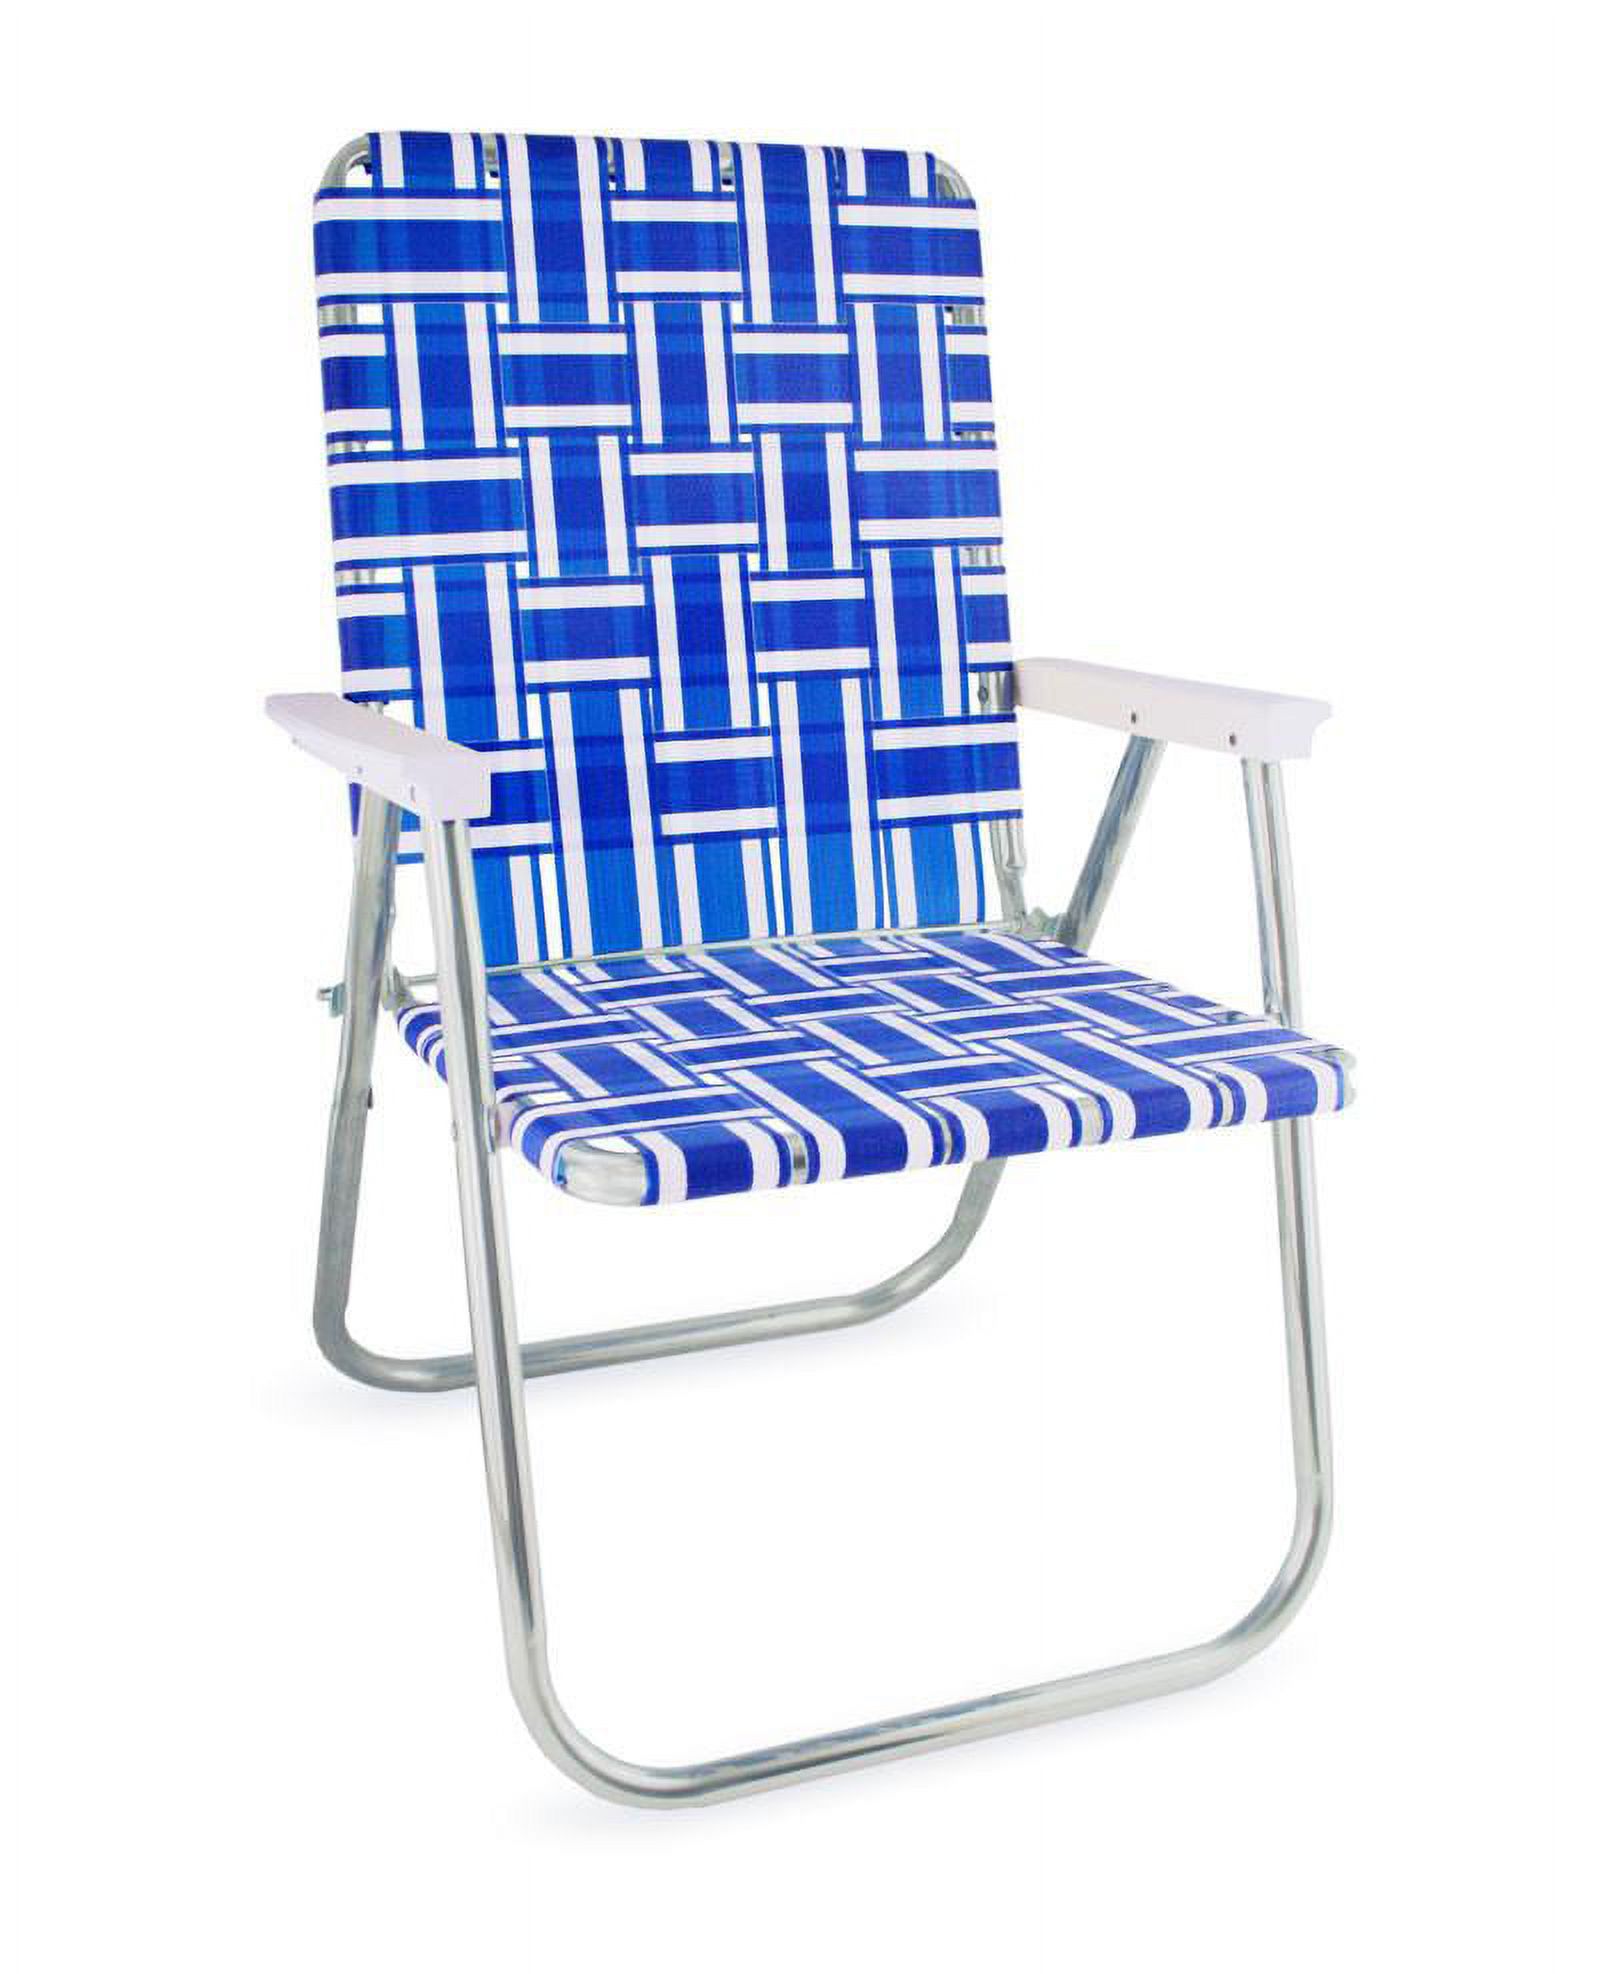 Lawn Chair USA Classic Folding Aluminum Webbed Chair | Blue/ White with White Arms - image 1 of 7